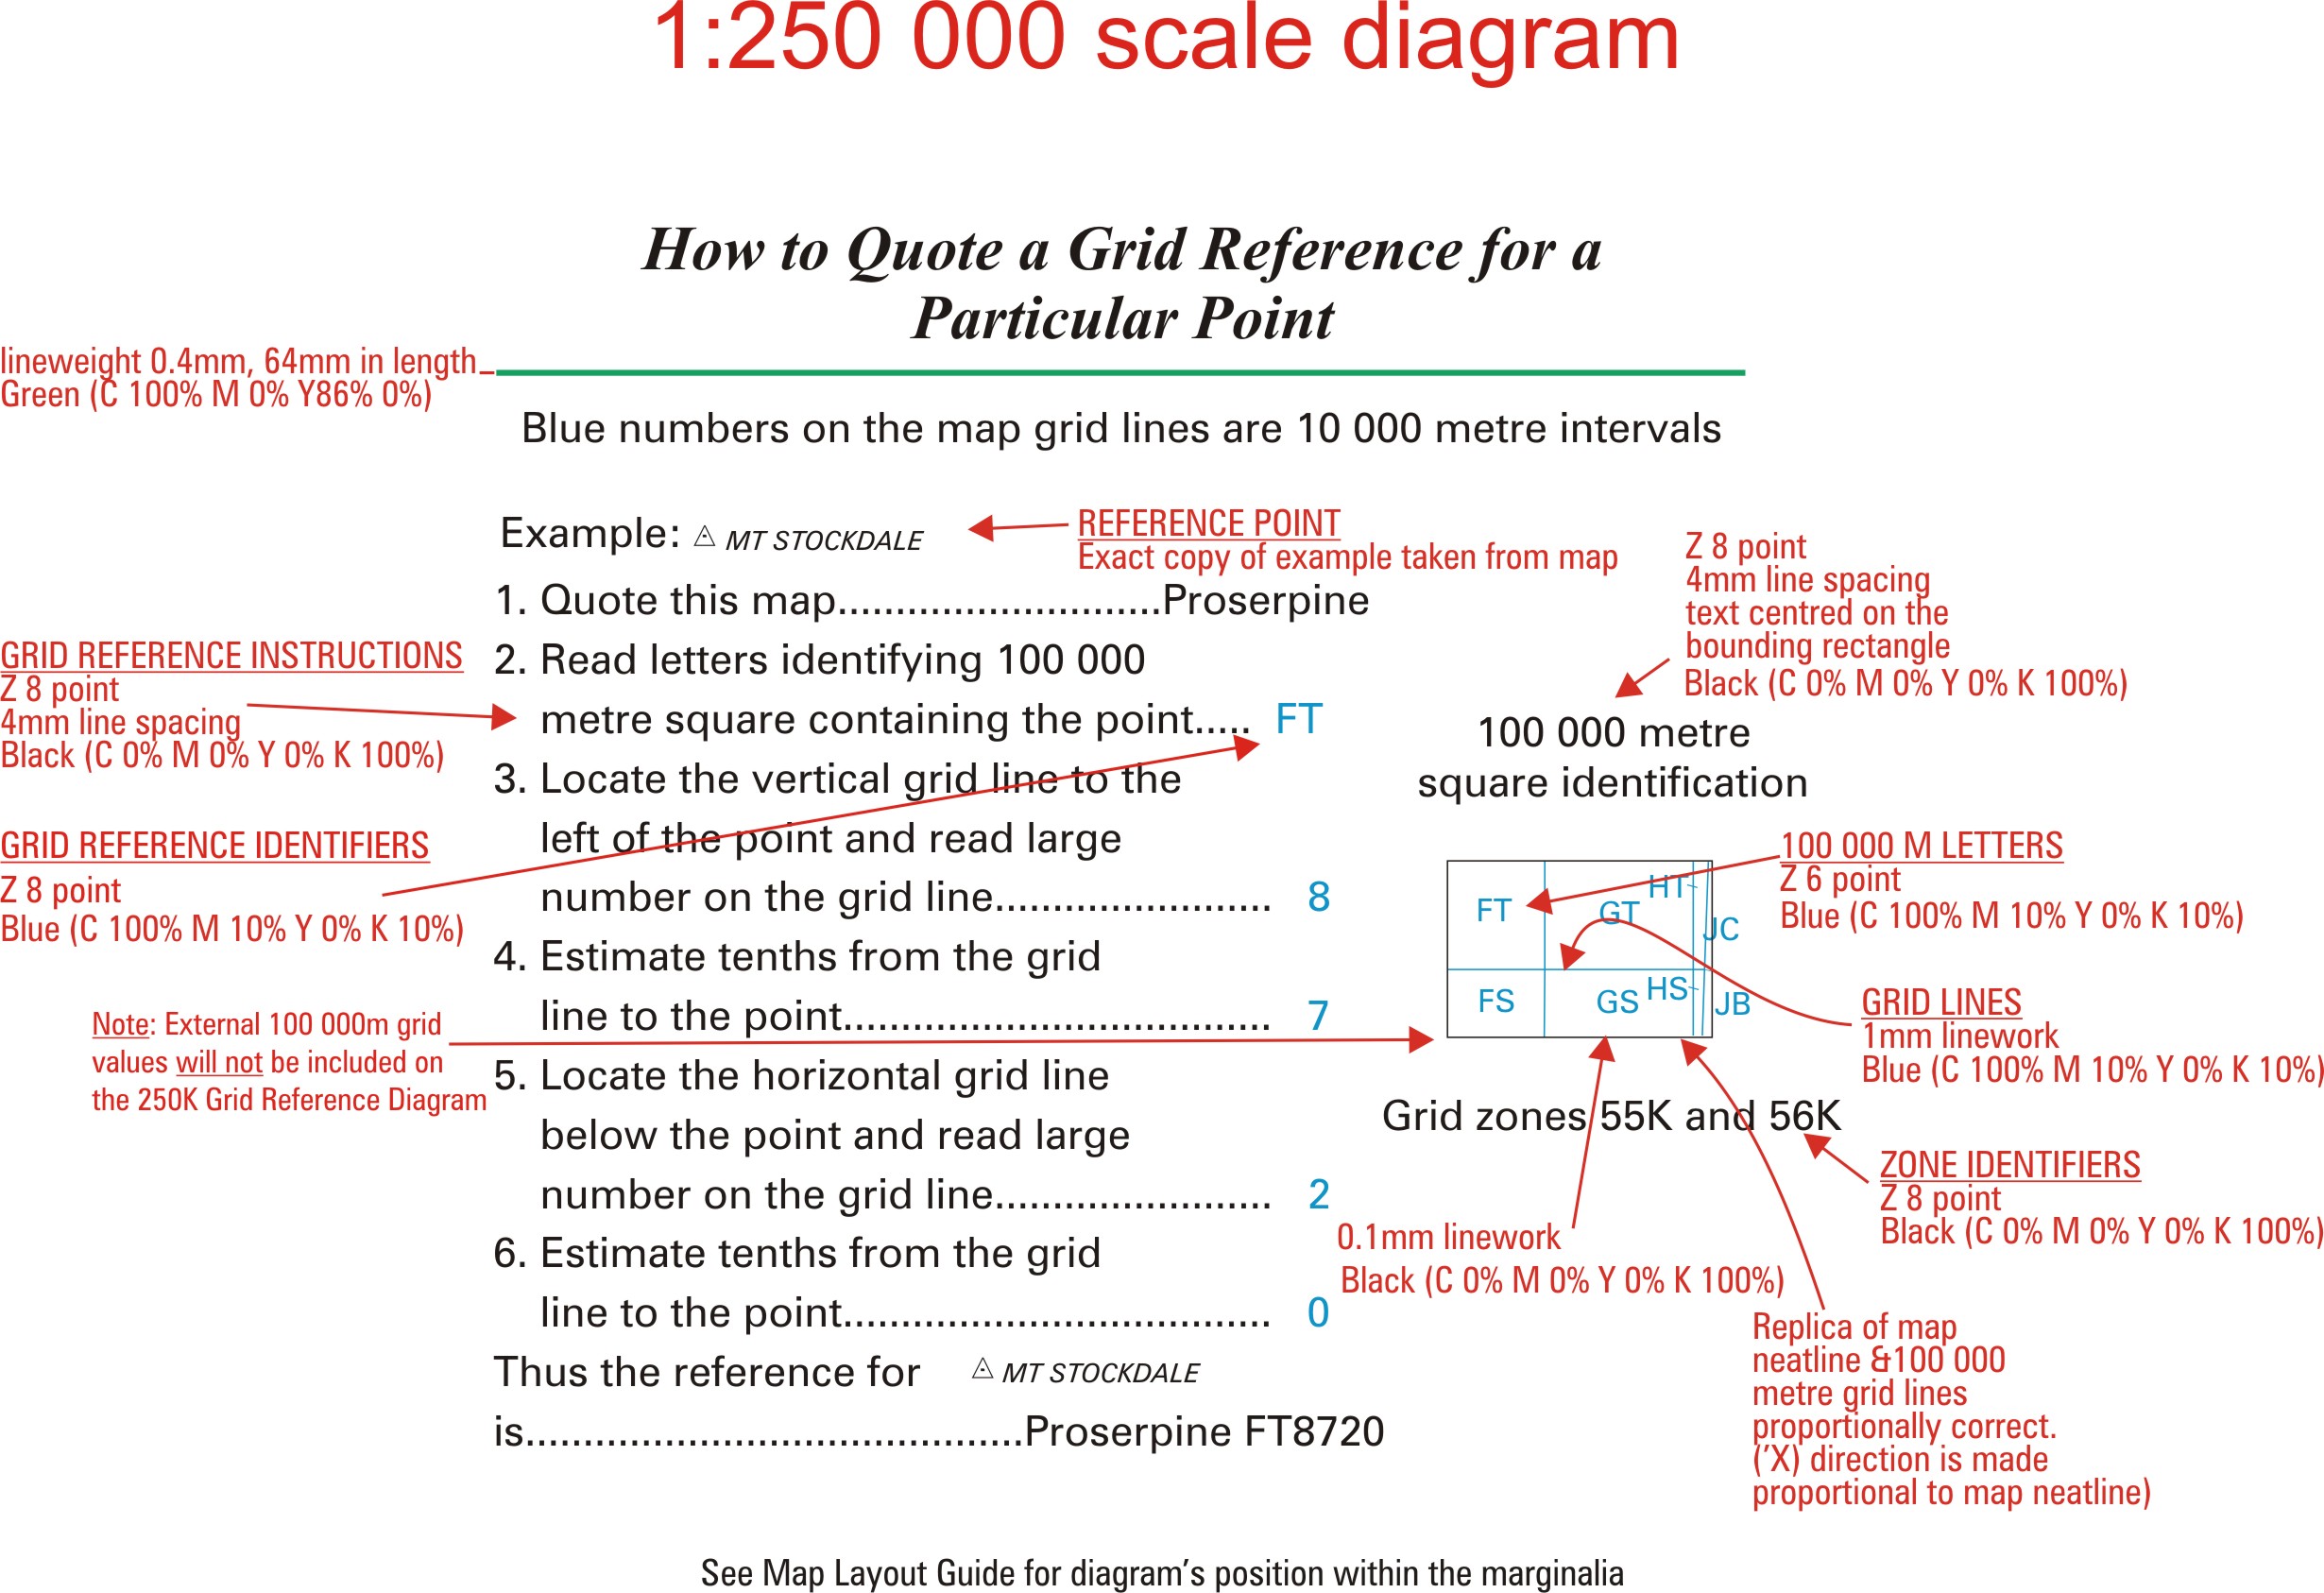 Grid Reference Diagram for 1:250 000